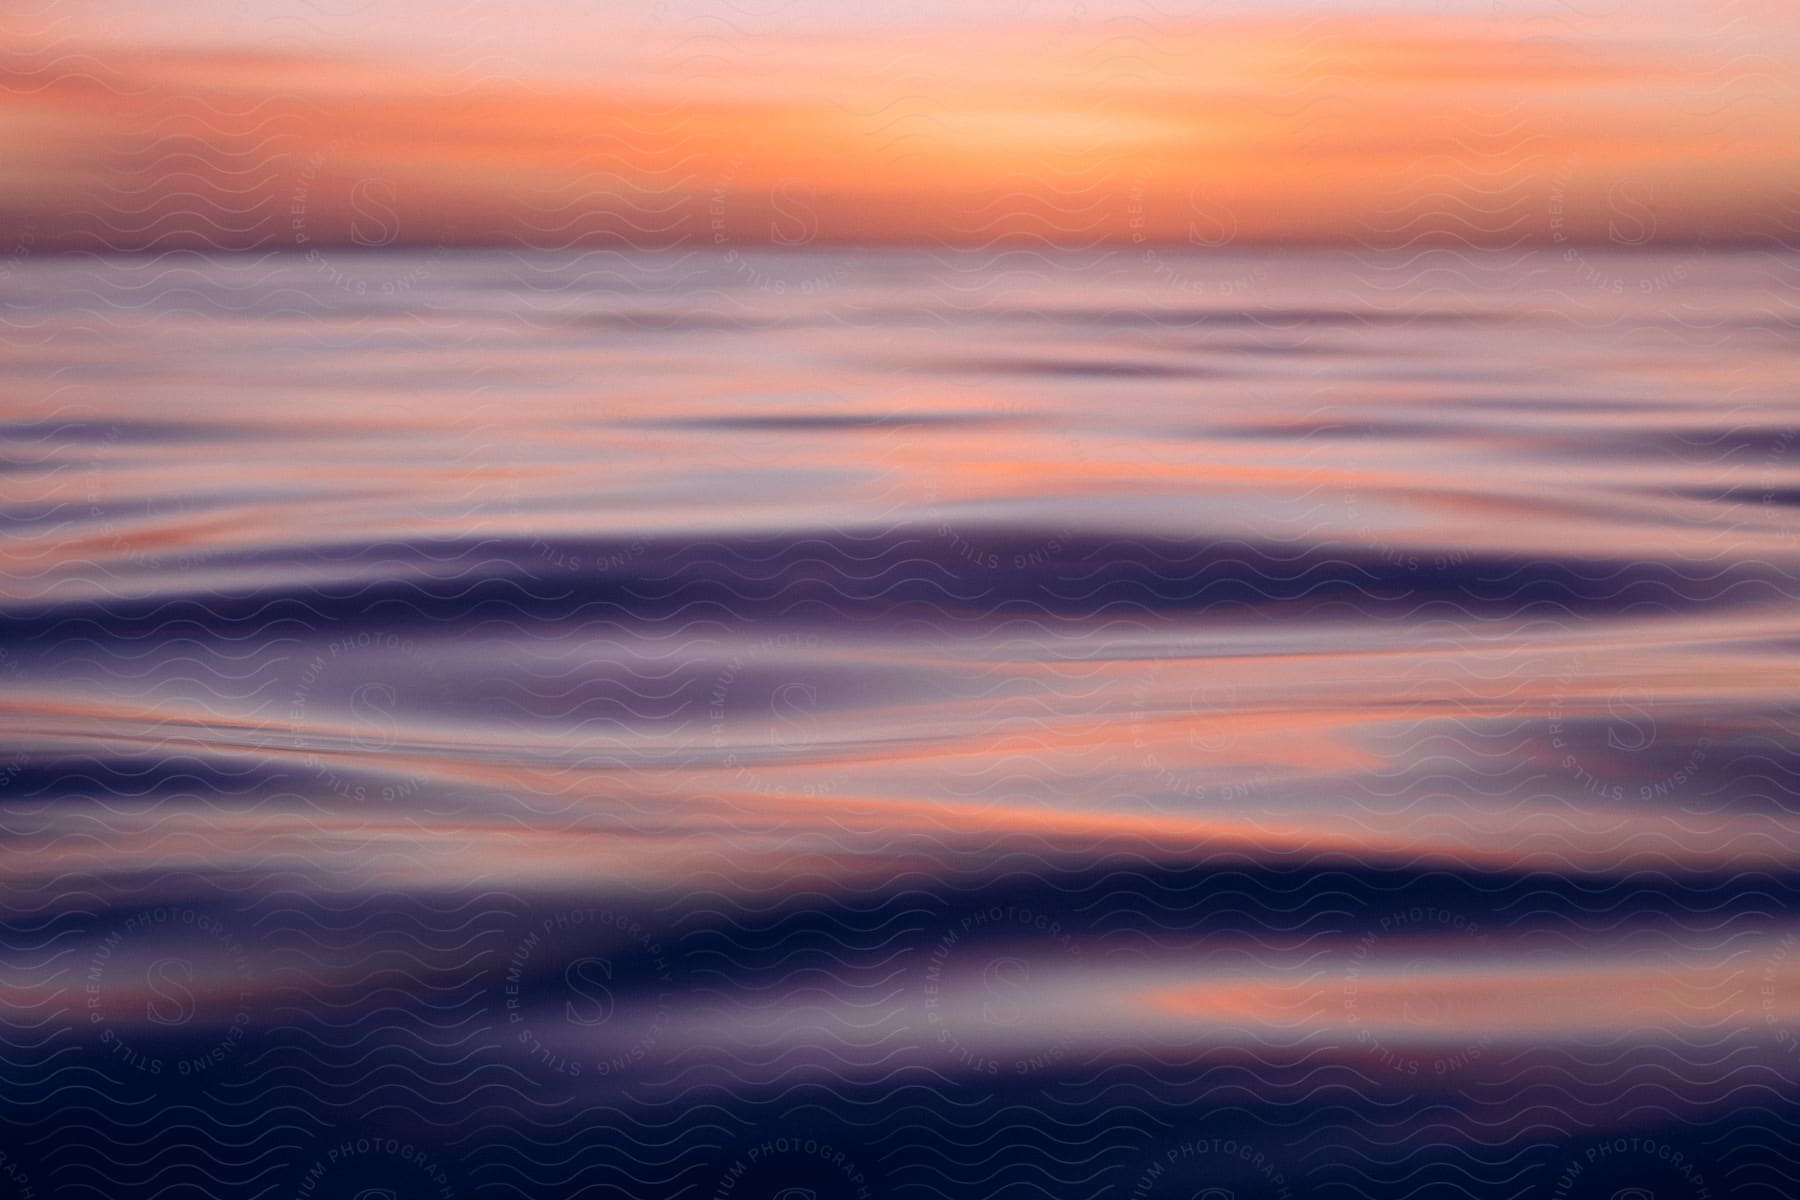 Distorted blurred shot of water ripples and the sky at dusk